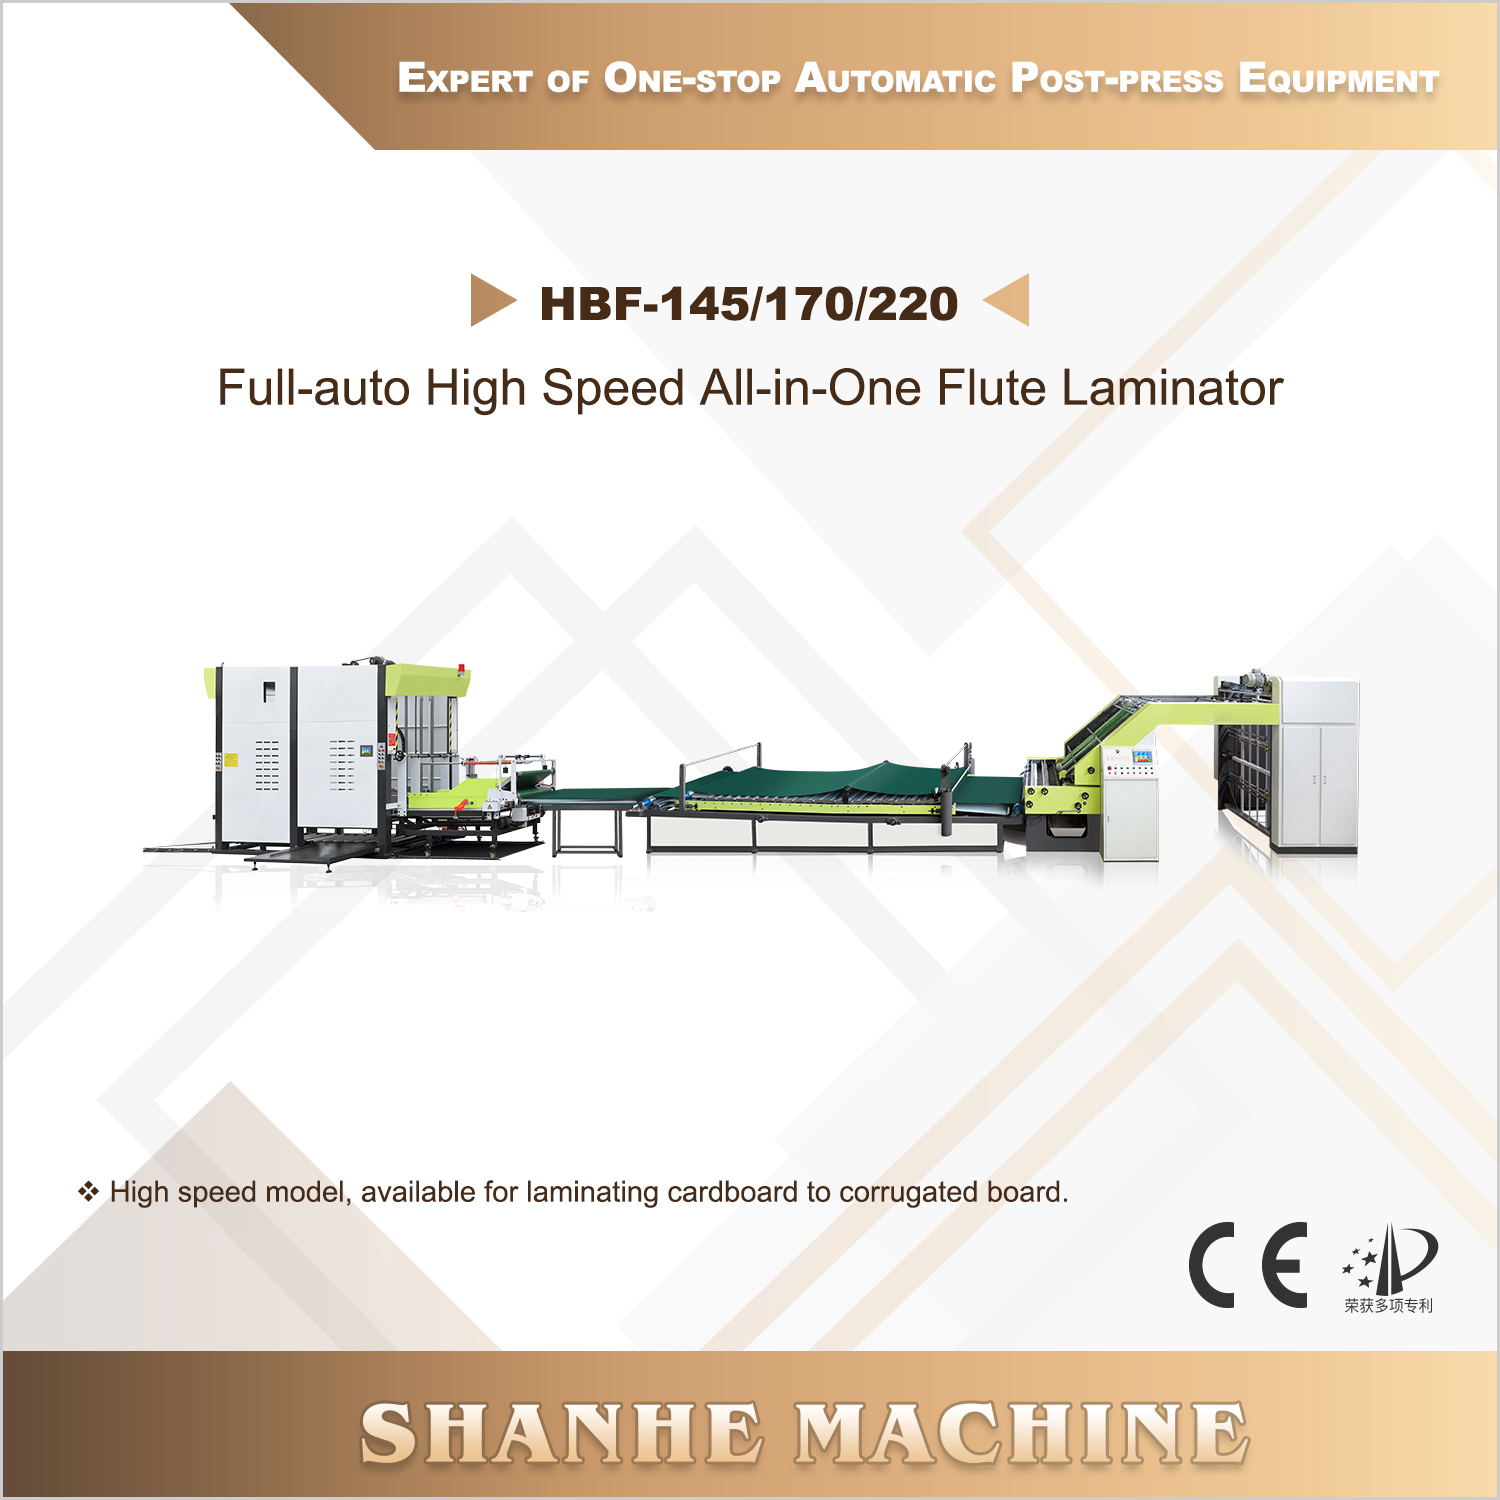 HBF-145/170/220 Full-auto High Speed All-in-One Flute Laminator